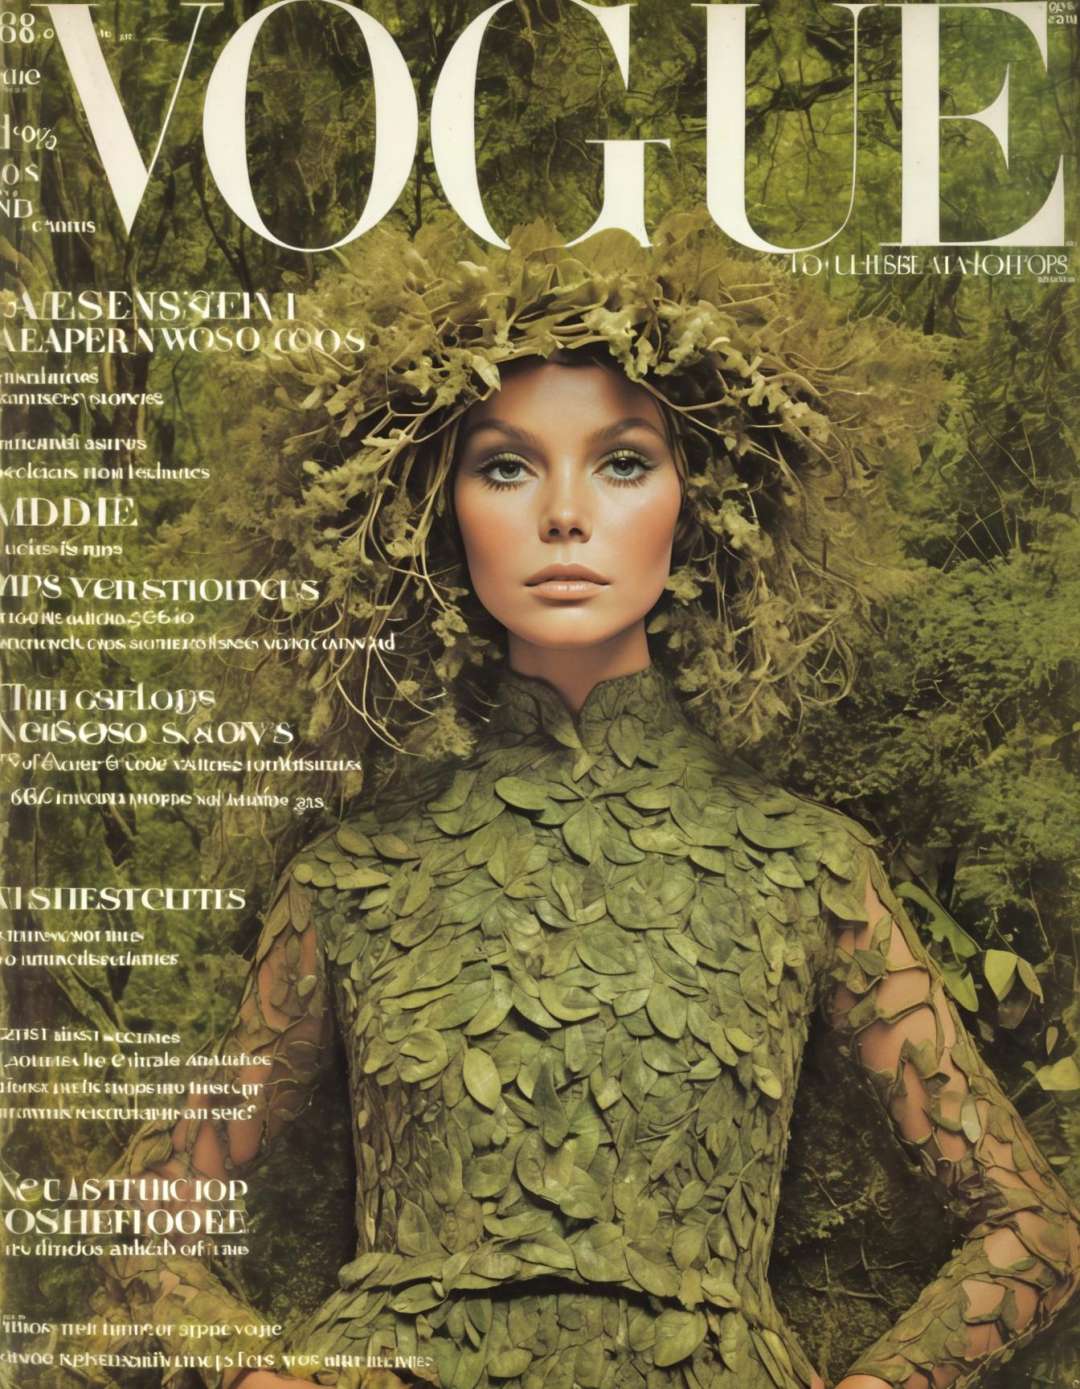 She organic textures, earthy tones, forest-inspired, eco-friendly fashion, sustainable couture, nature goddess, Green Fashion Magazine, lush woodland setting.,highly intricate,(VOGUE Cover Magazine:1.15),1968, 60s, black letters, hyper detailed, photorealistic,,